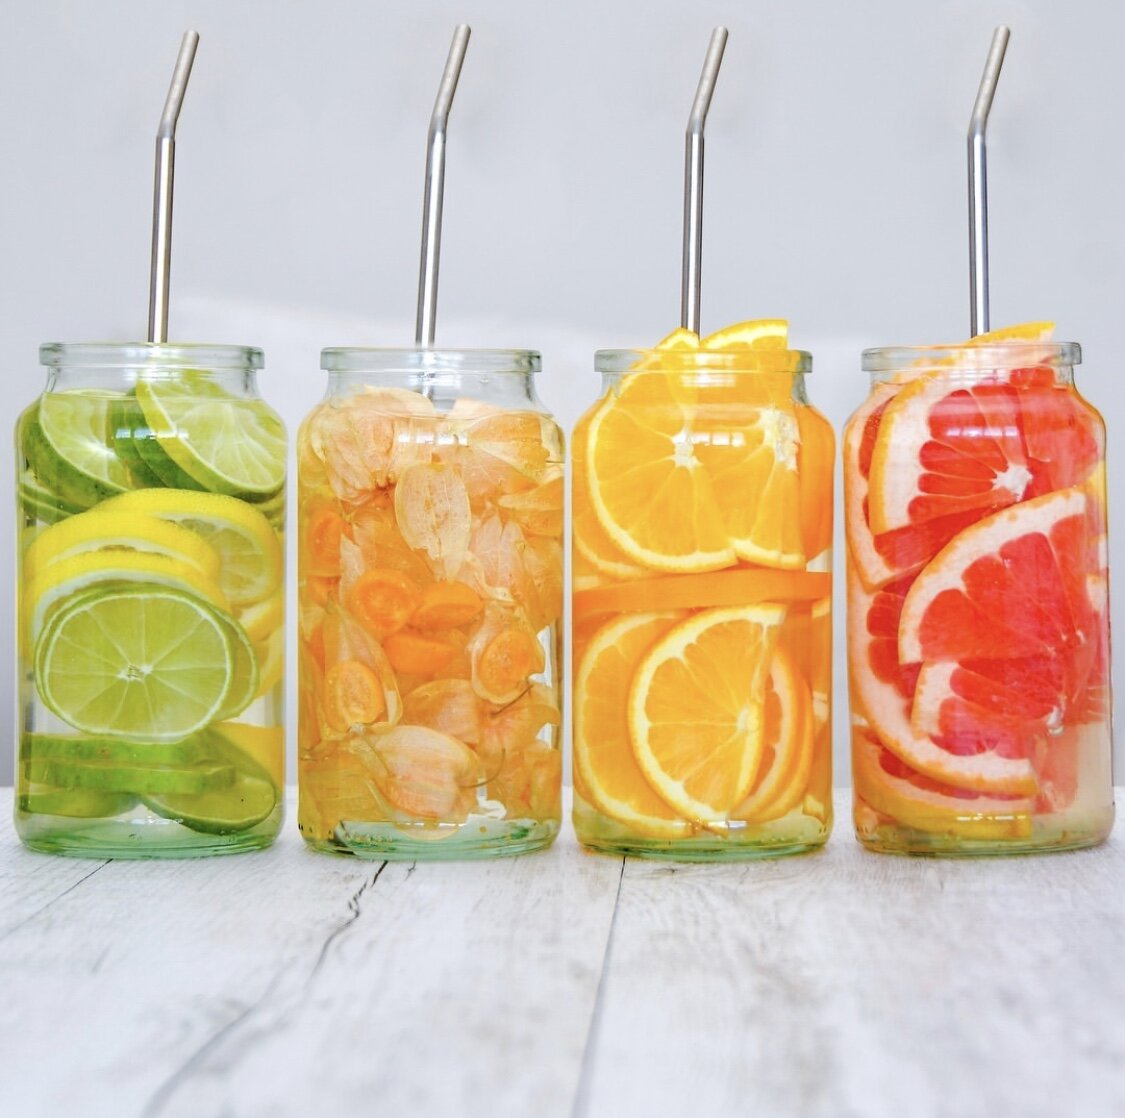 Bringing your own fruity water (or even a big pitcher to share!) is another great non-alcoholic drink alternative 